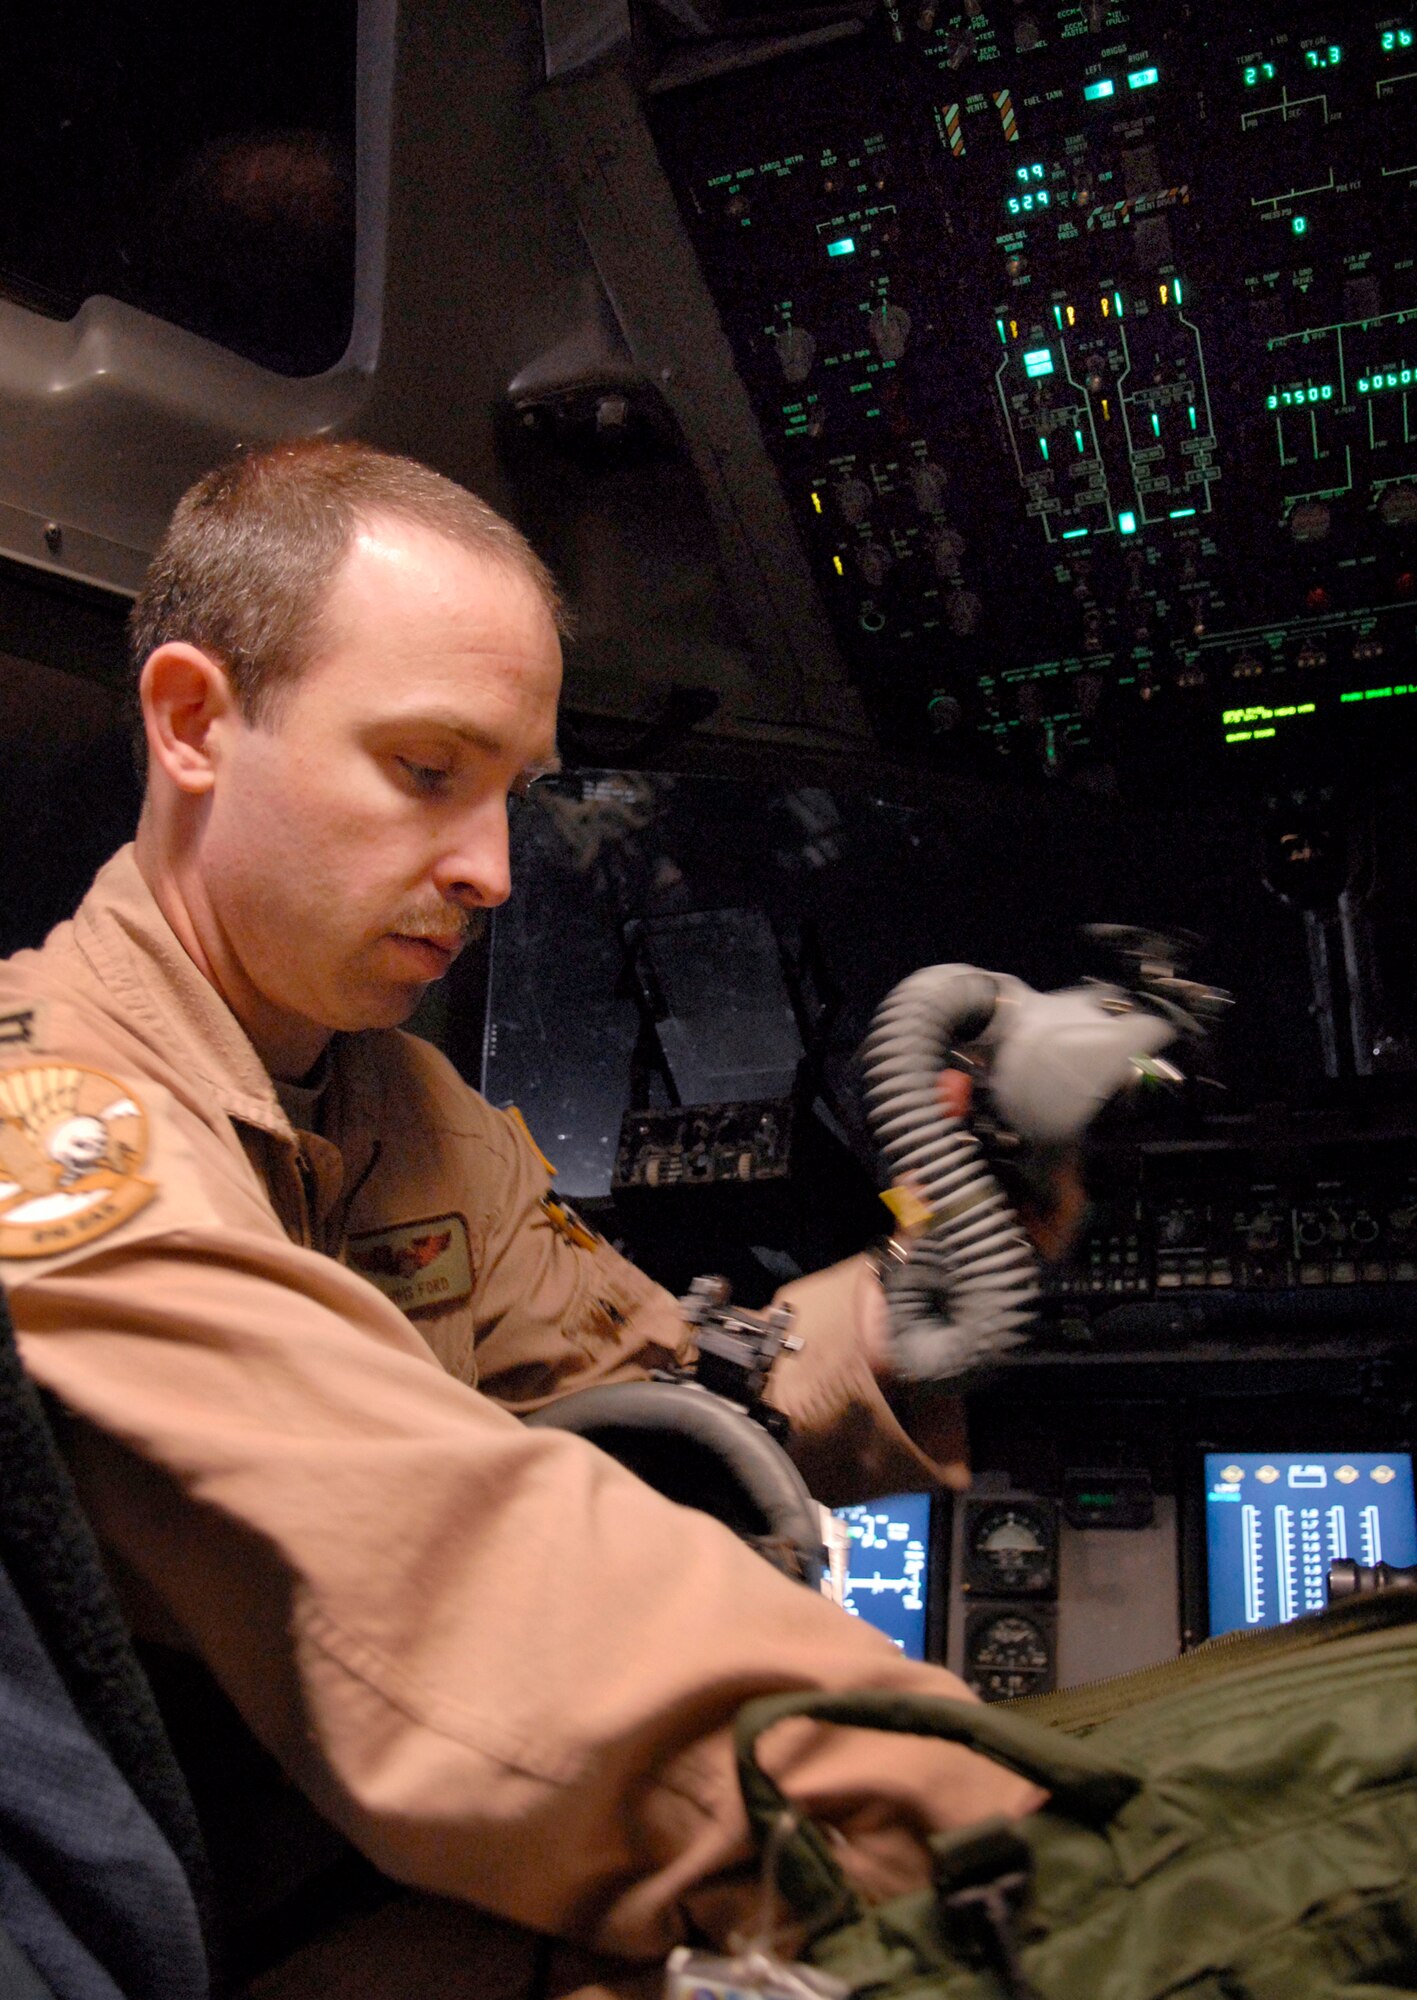 Capt. Christopher Ford, an 816th Expeditionary Airlift Squadron pilot, inspects his equipment during pre-flight checks in a C-17 Globemaster III, March 23, 2009 at an undisclosed location in Southwest Asia.  Capt. Ford and his crew helped guide a KC-135R Stratotanker crew, who had lost navigational capability over Afghanistan, to a safe landing at Bagram Air Base, Afghanistan March 16, 2009.  Capt. Ford hails from Albany, Ga. and is deployed from Charleston Air Force Base, S.C. in support of Operations Iraqi and Enduring Freedom and Combined Joint Task Force - Horn of Africa.  (U.S. Air Force photo/Senior Airman Andrew Satran/released)